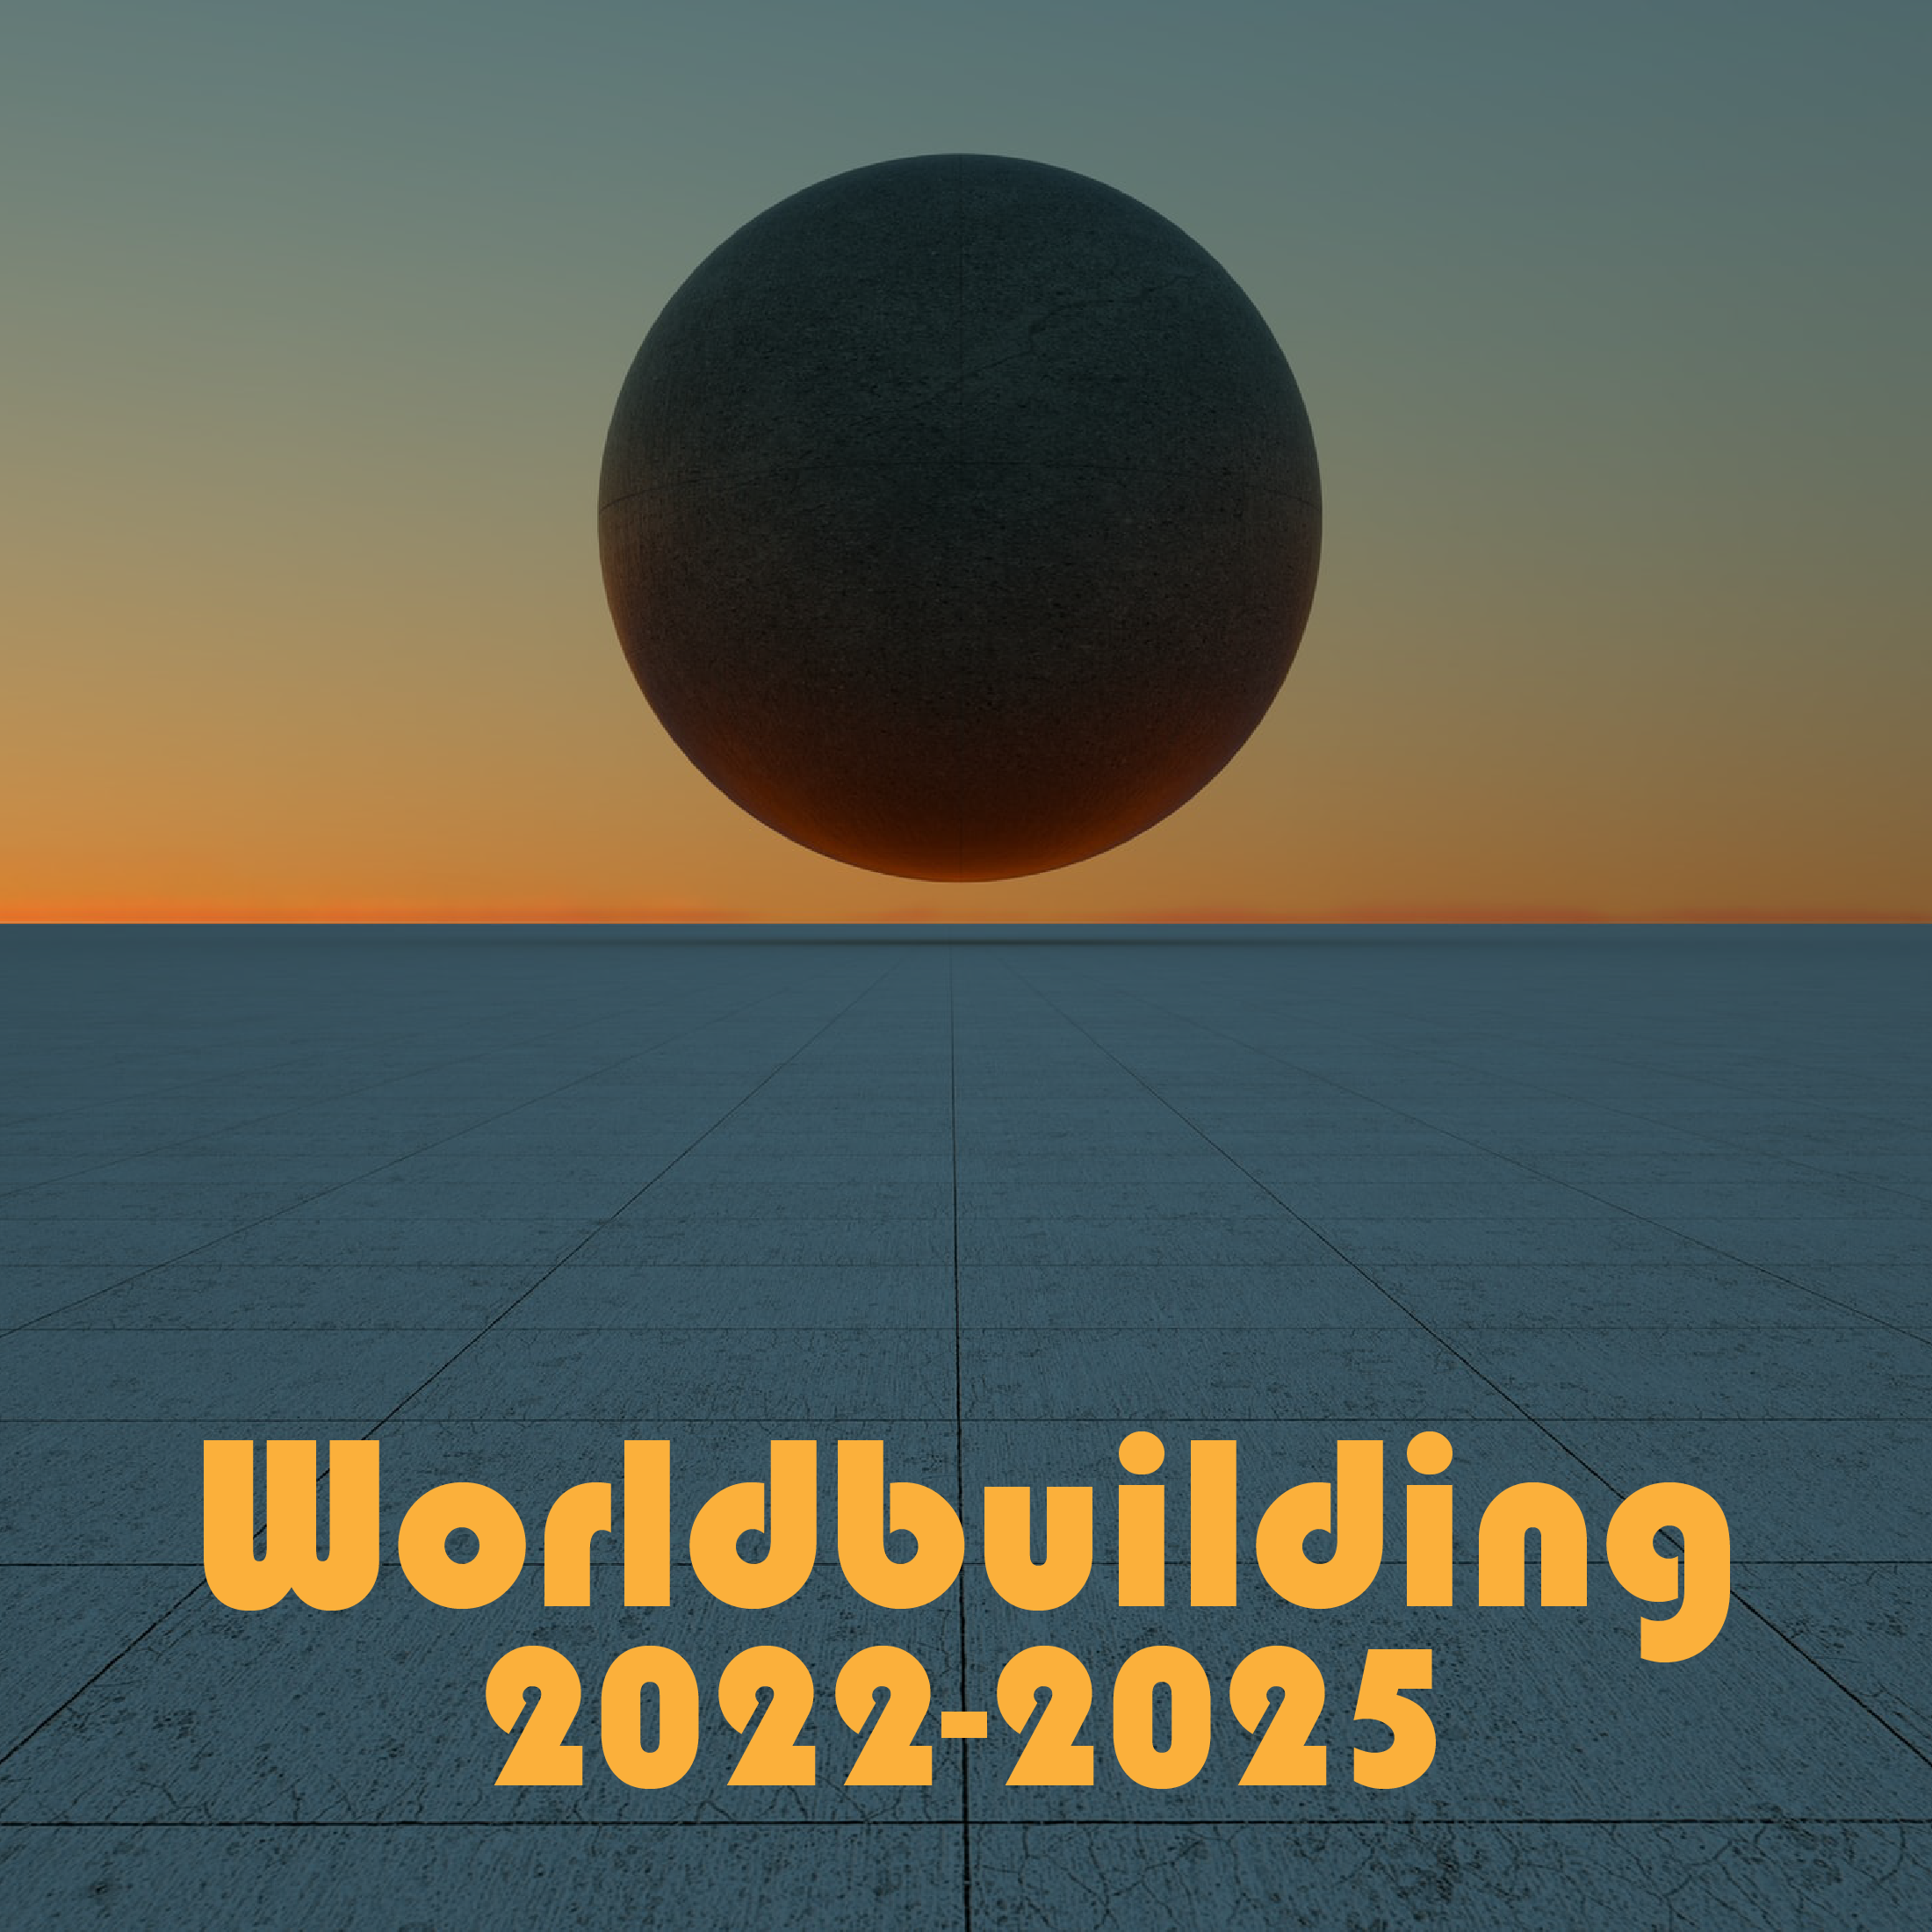 Worldbuilding 2022-2025. Image of a sphere floating above a horizon with tiled foreground.